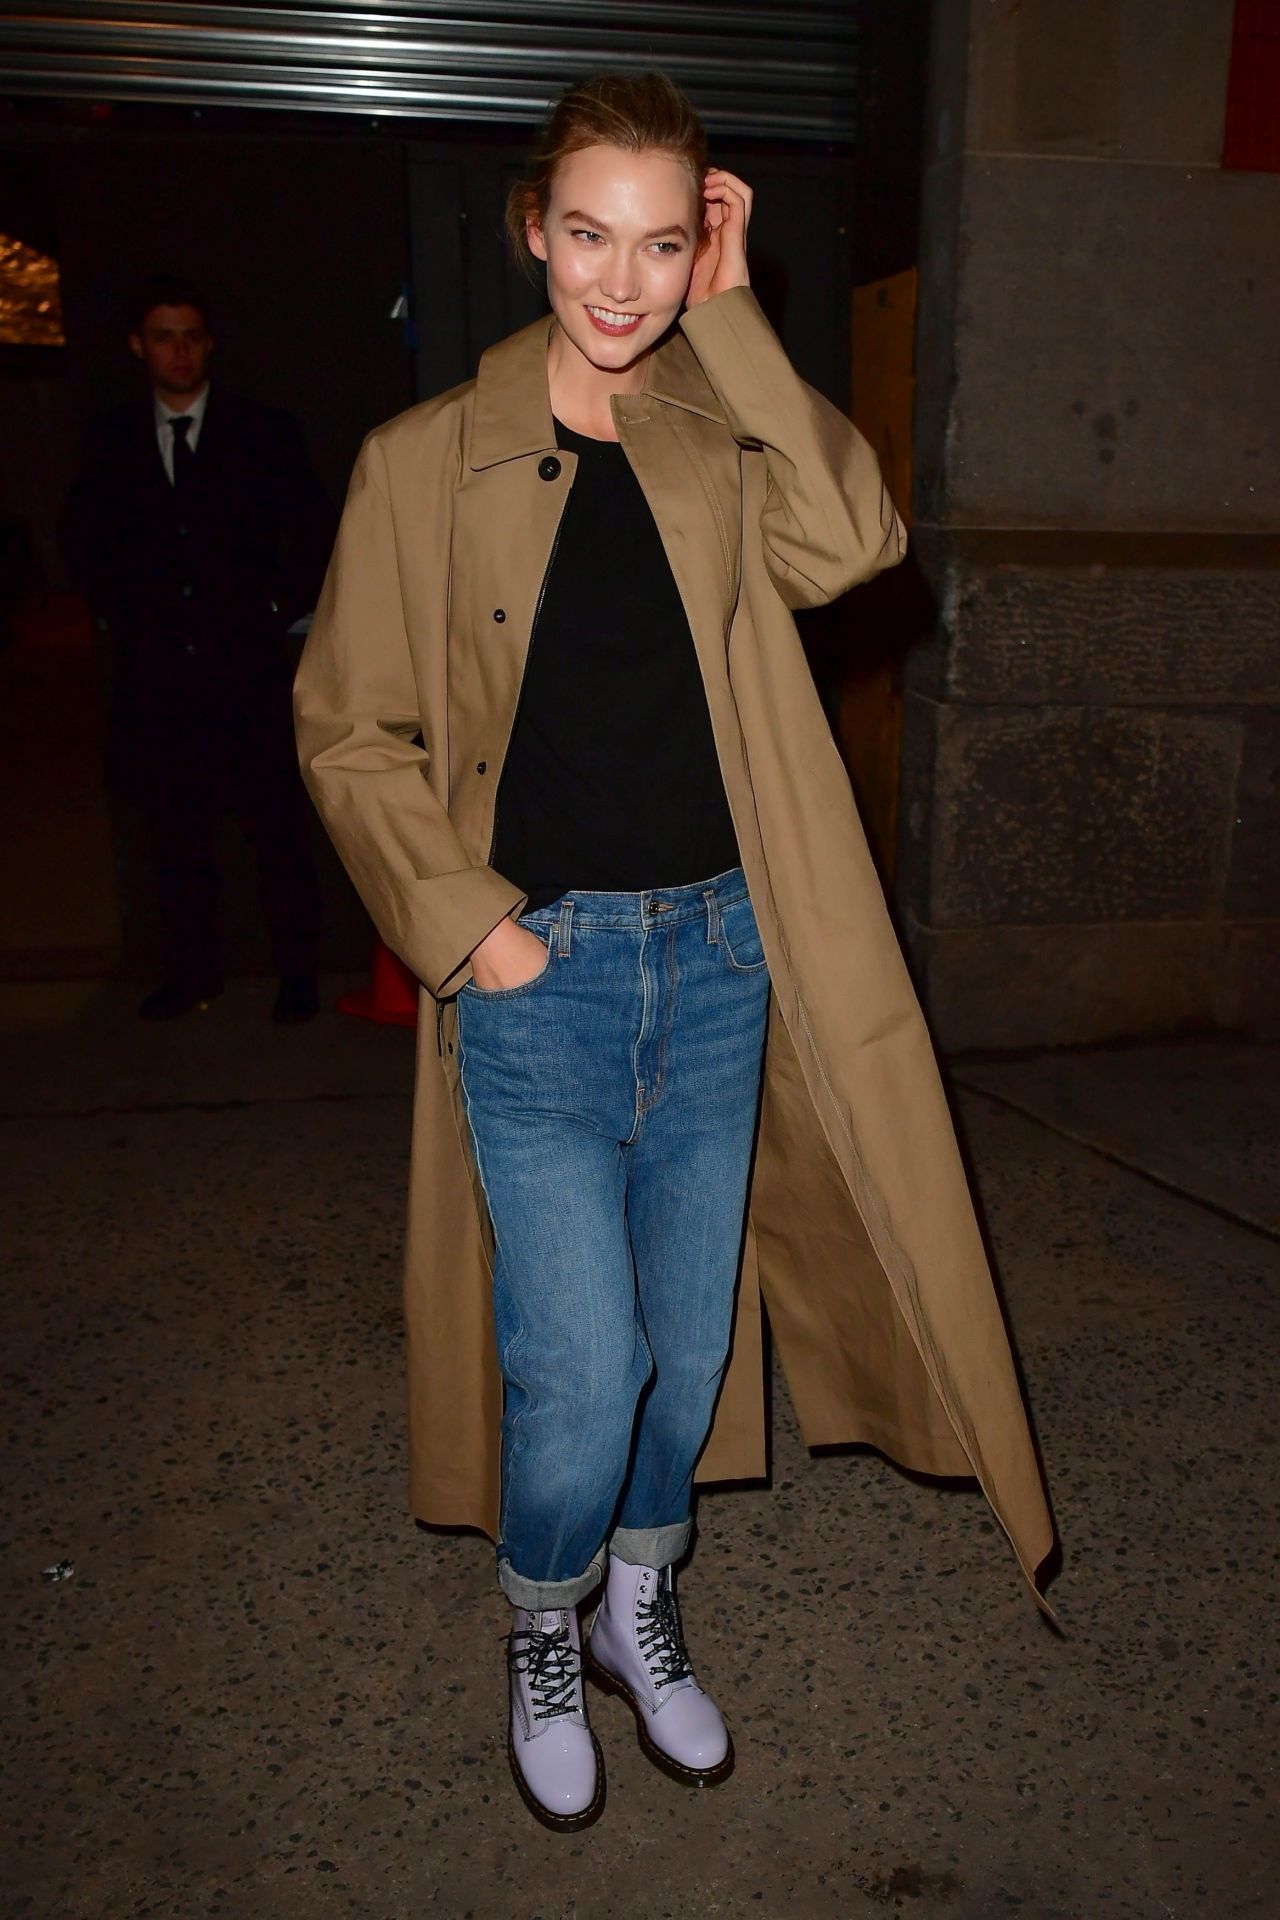 Karlie Kloss - Leaving the Marc Jacobs Fashion Show in NYC 02/13/20191280 x 1920